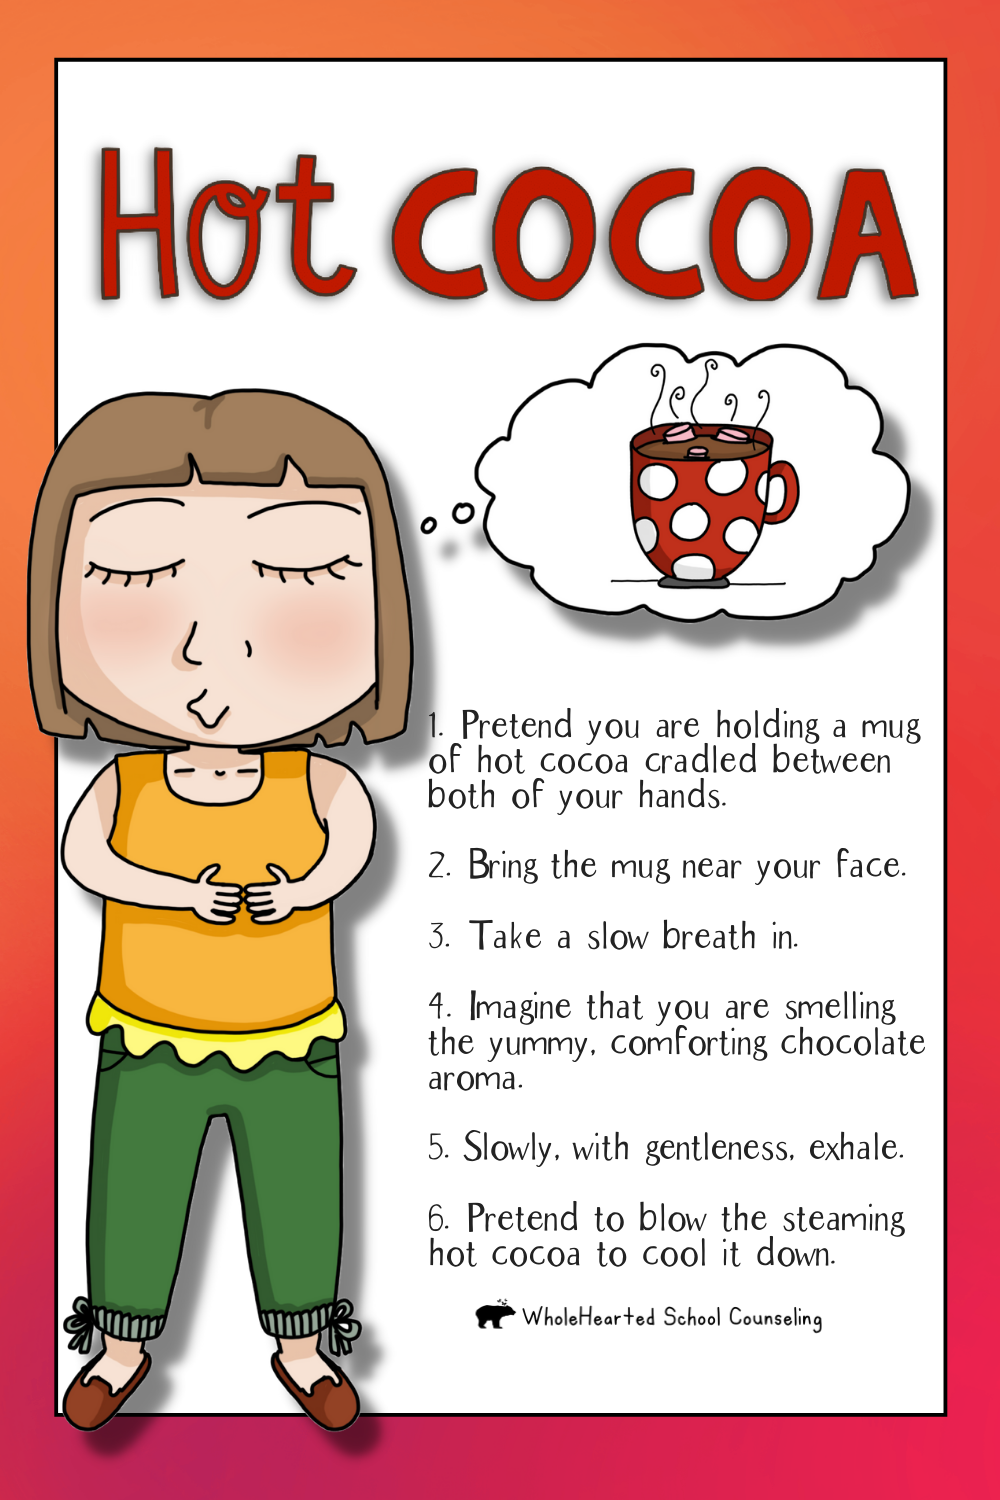 Fun Hot Cocoa Breathing Exercise for Kids